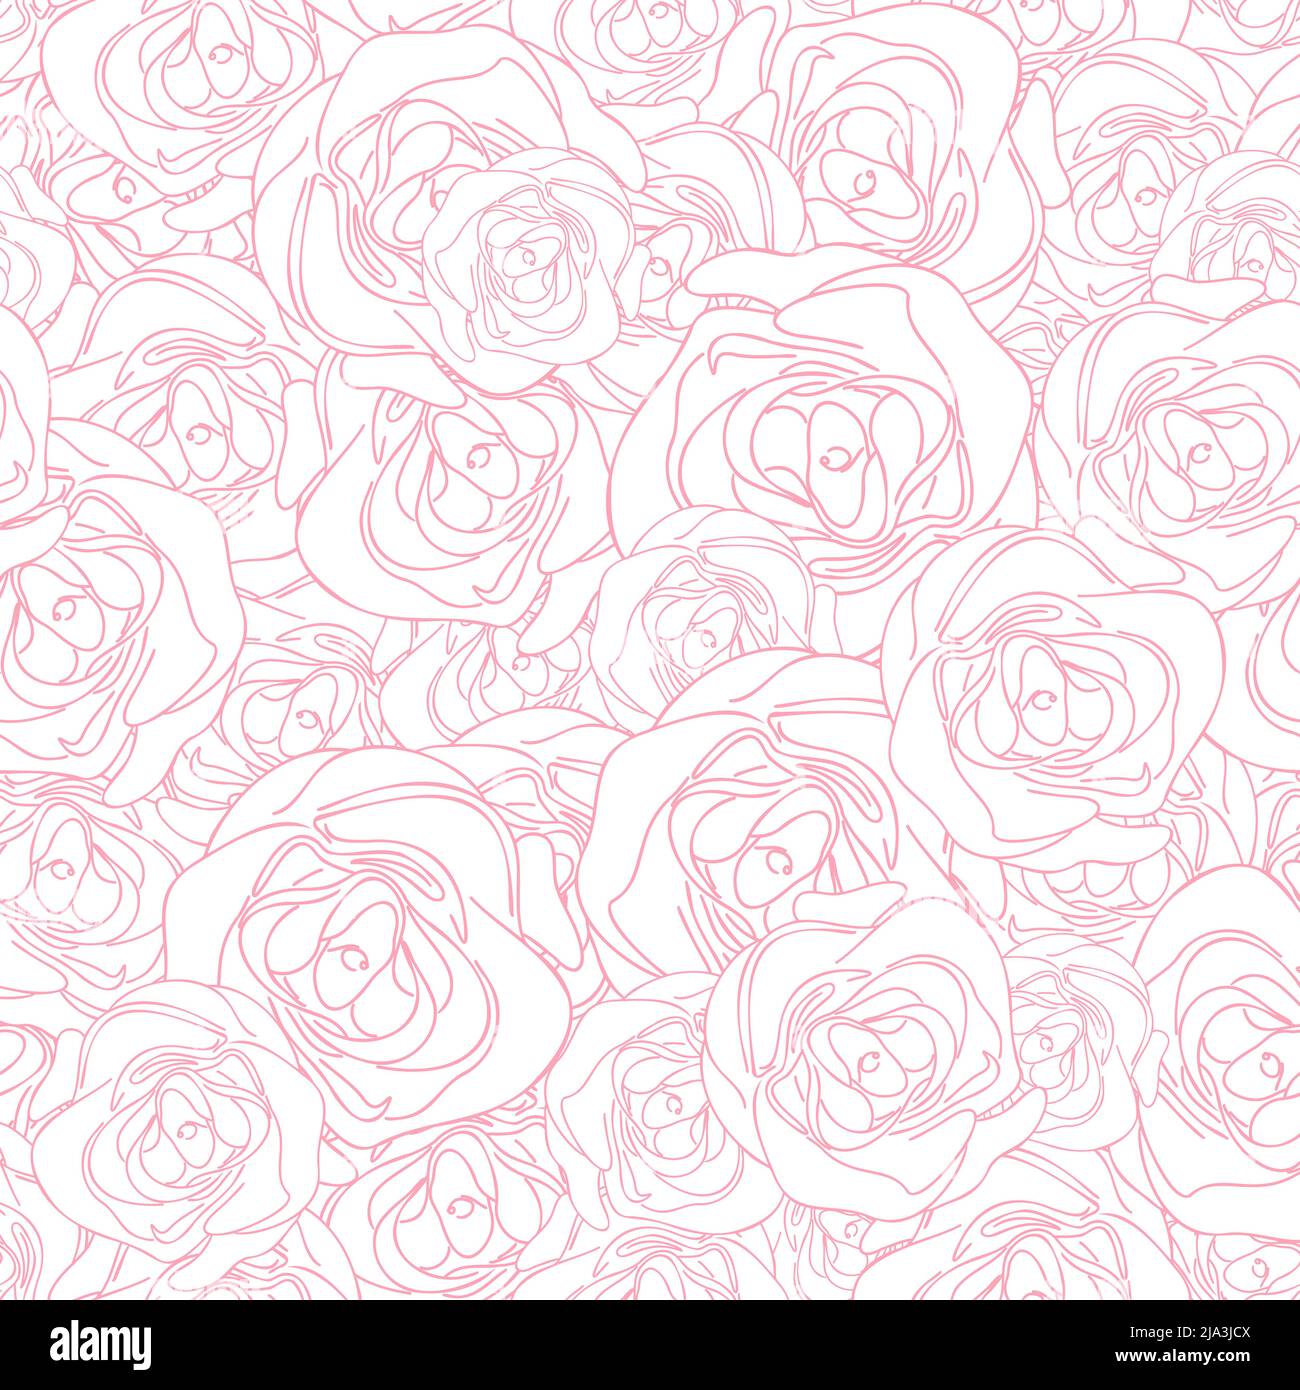 Pink flower aesthetic background Stock Vector Images - Alamy